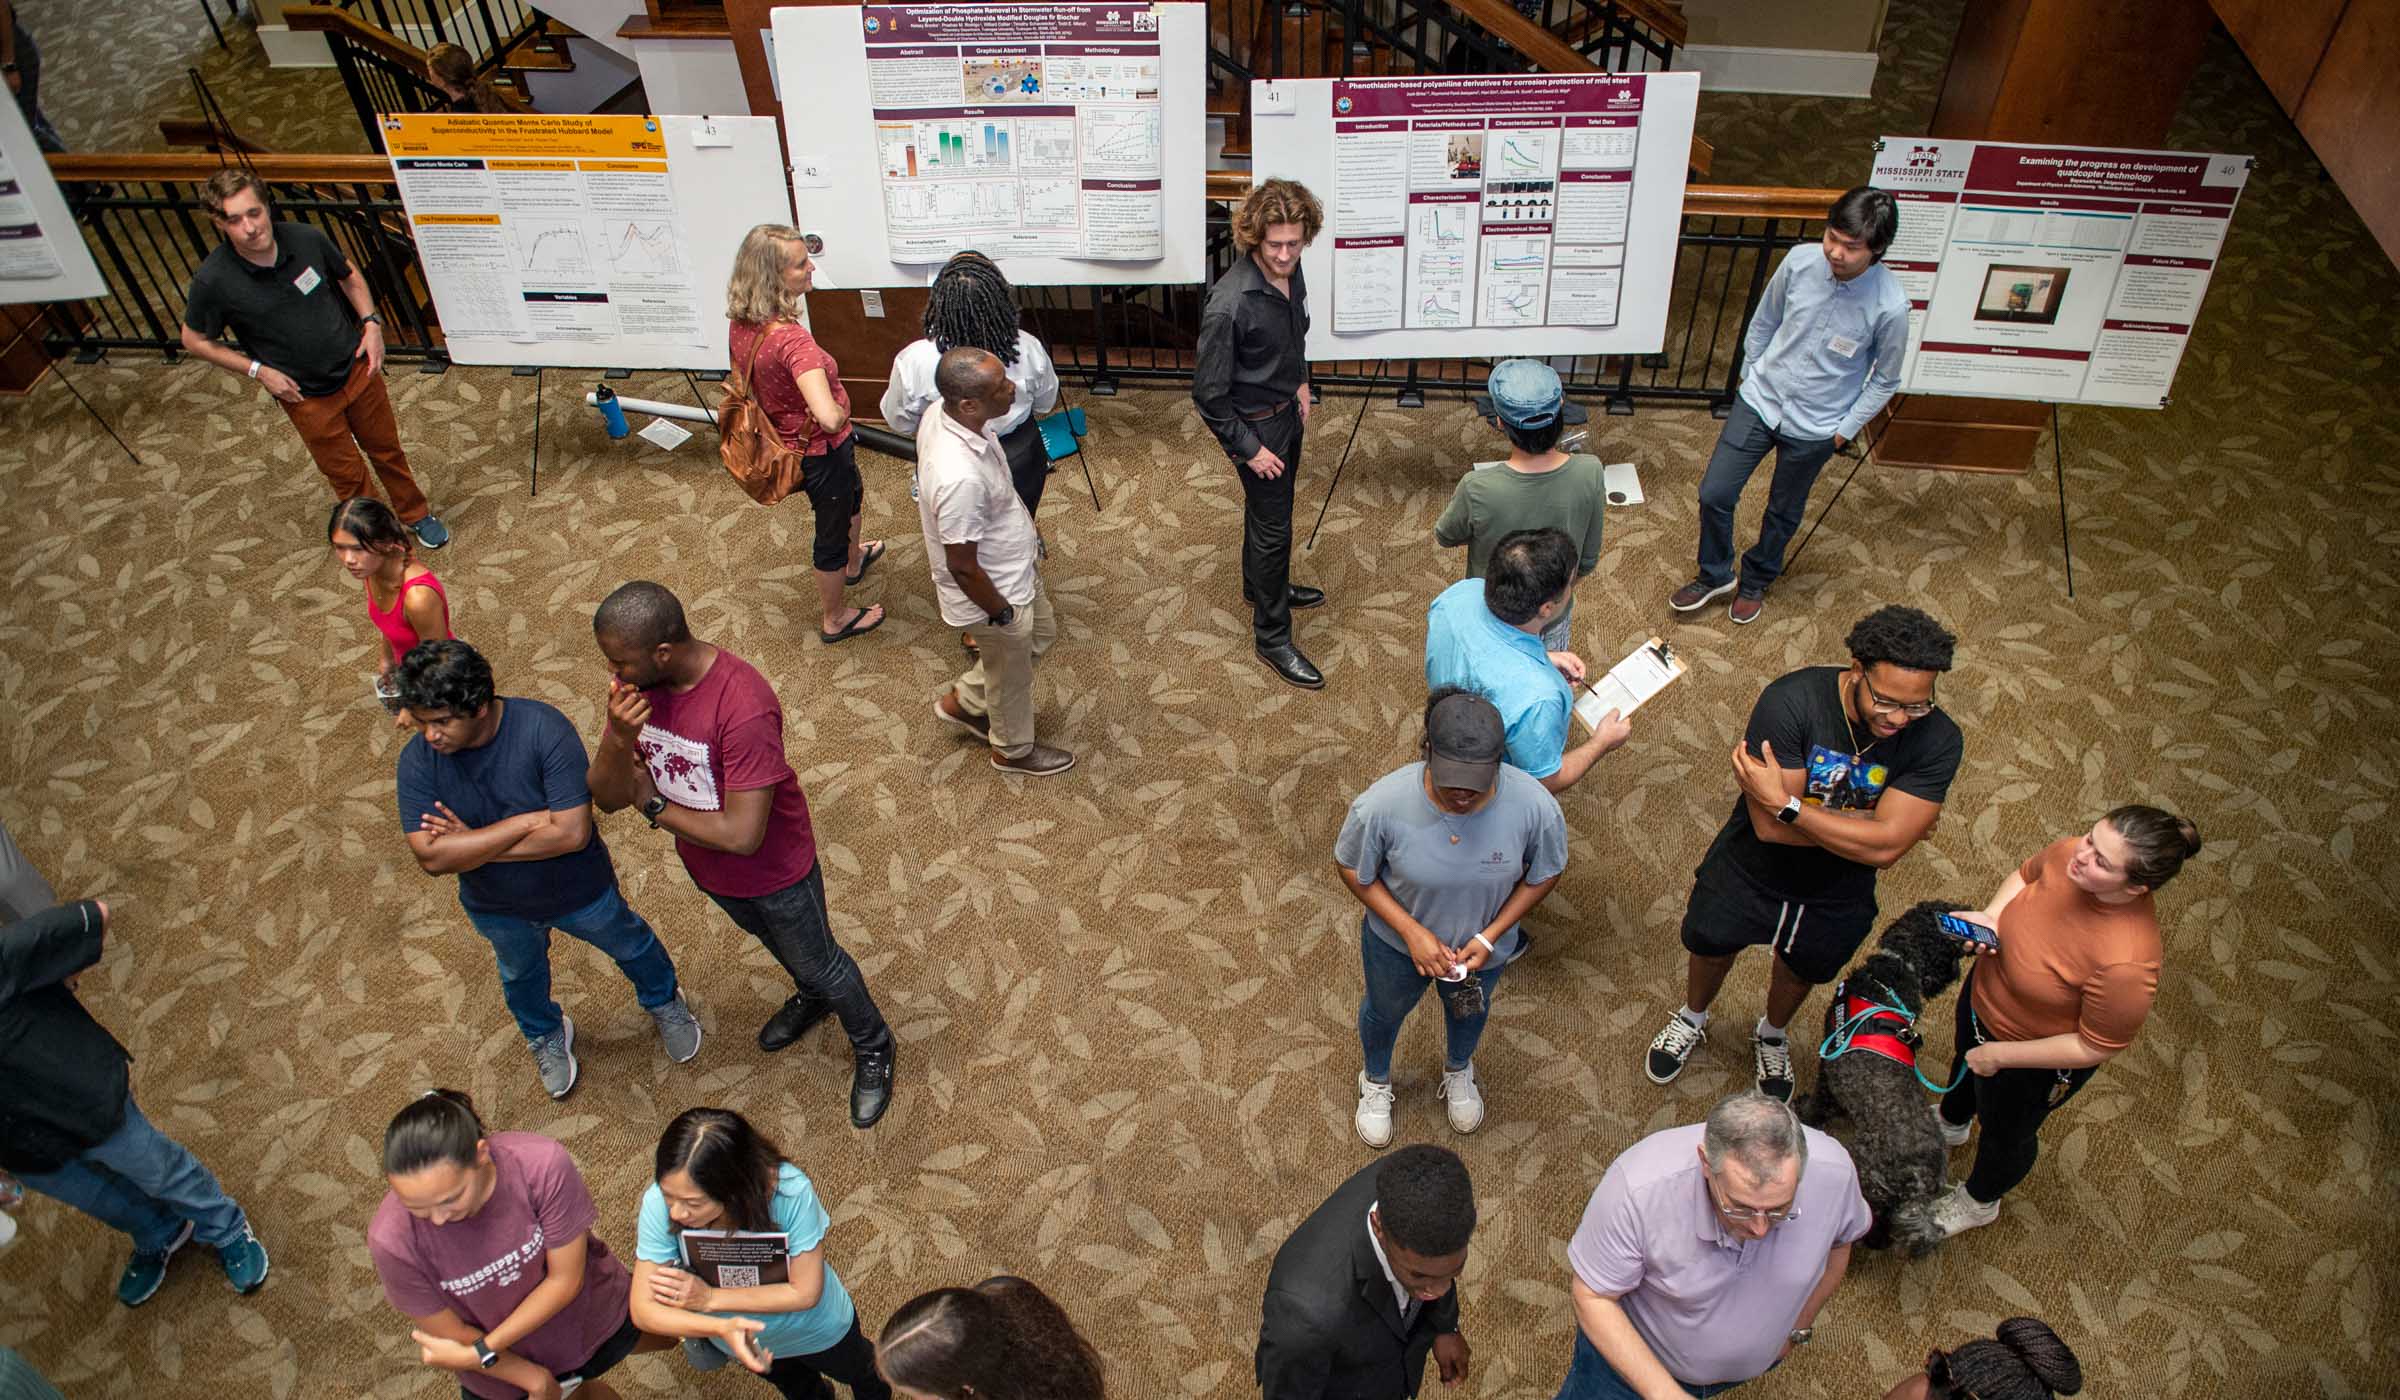 Overhead view looking down at over 20 attendees and presenters talking in front of research posters displayed on the 3rd floor atrium of Griffis Hall.